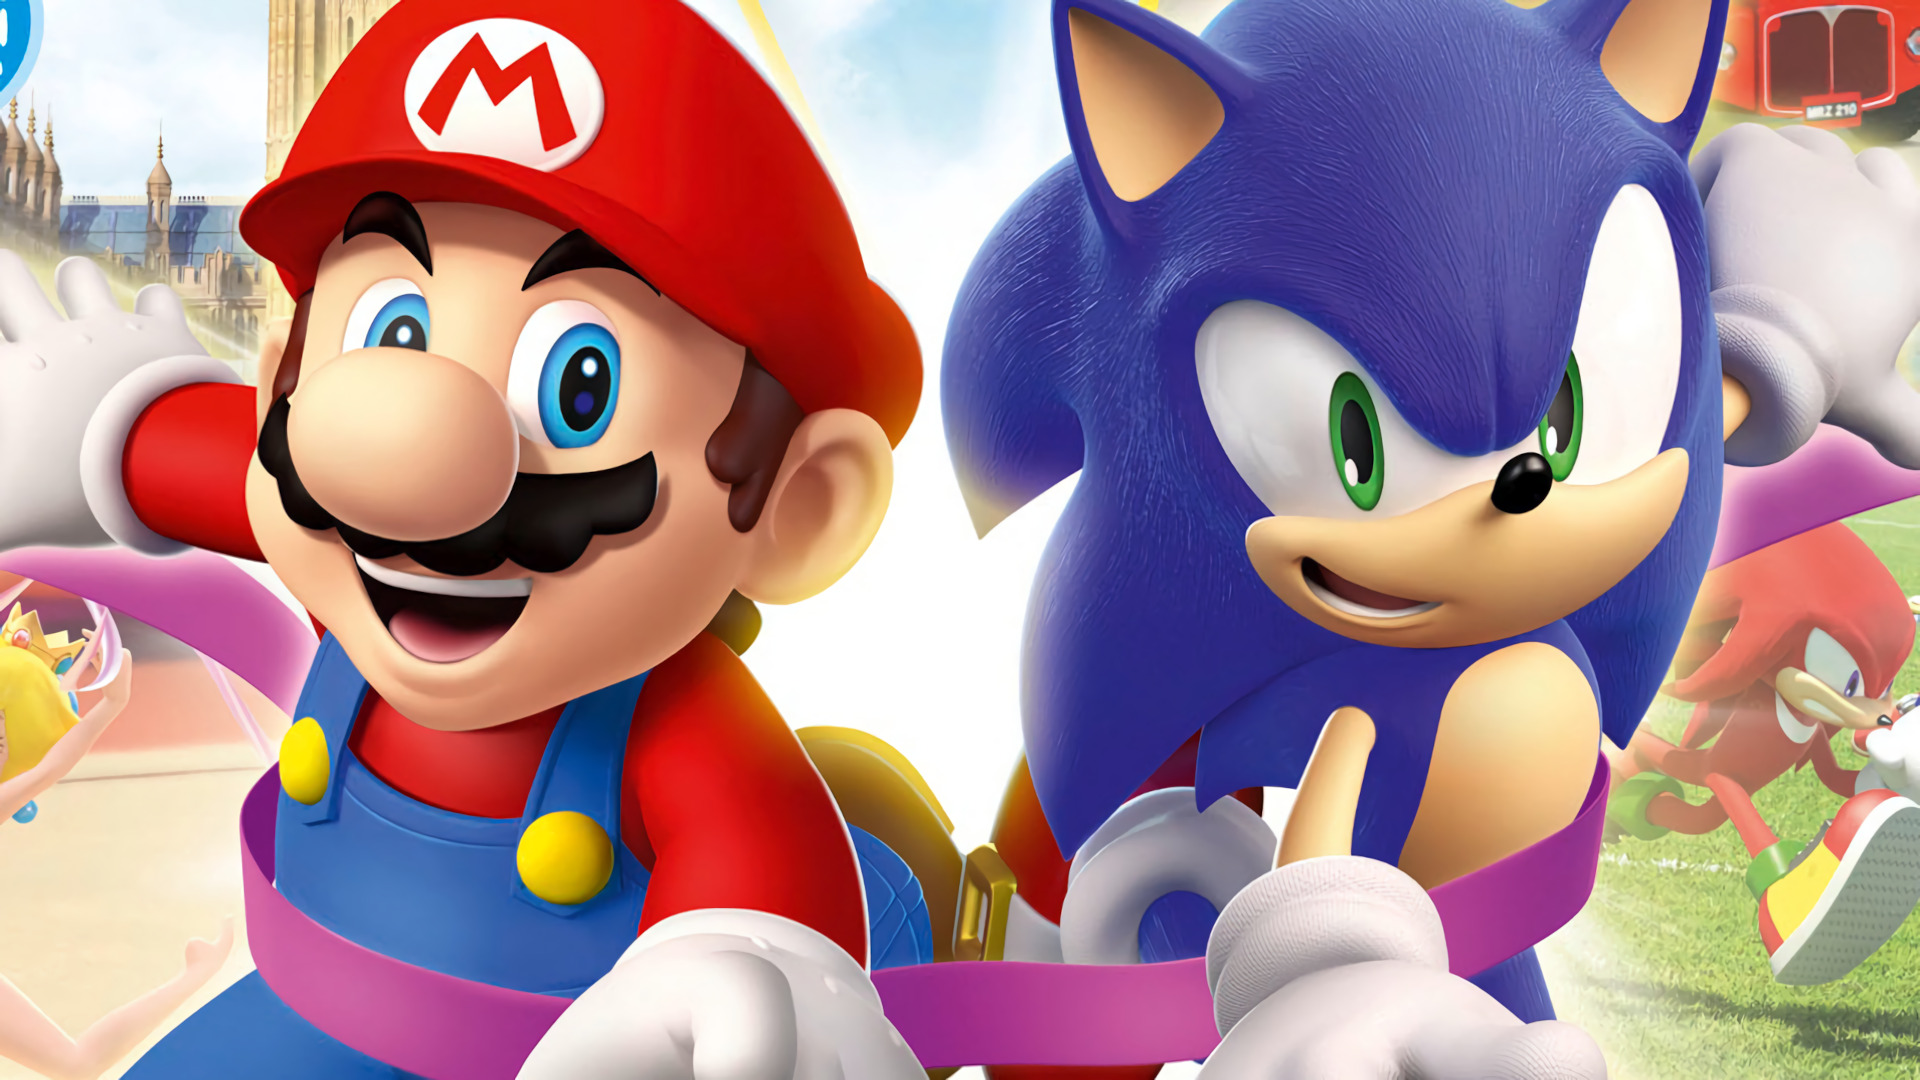 Mario & Sonic at the London 2012 Olympic Games (2012) - MobyGames